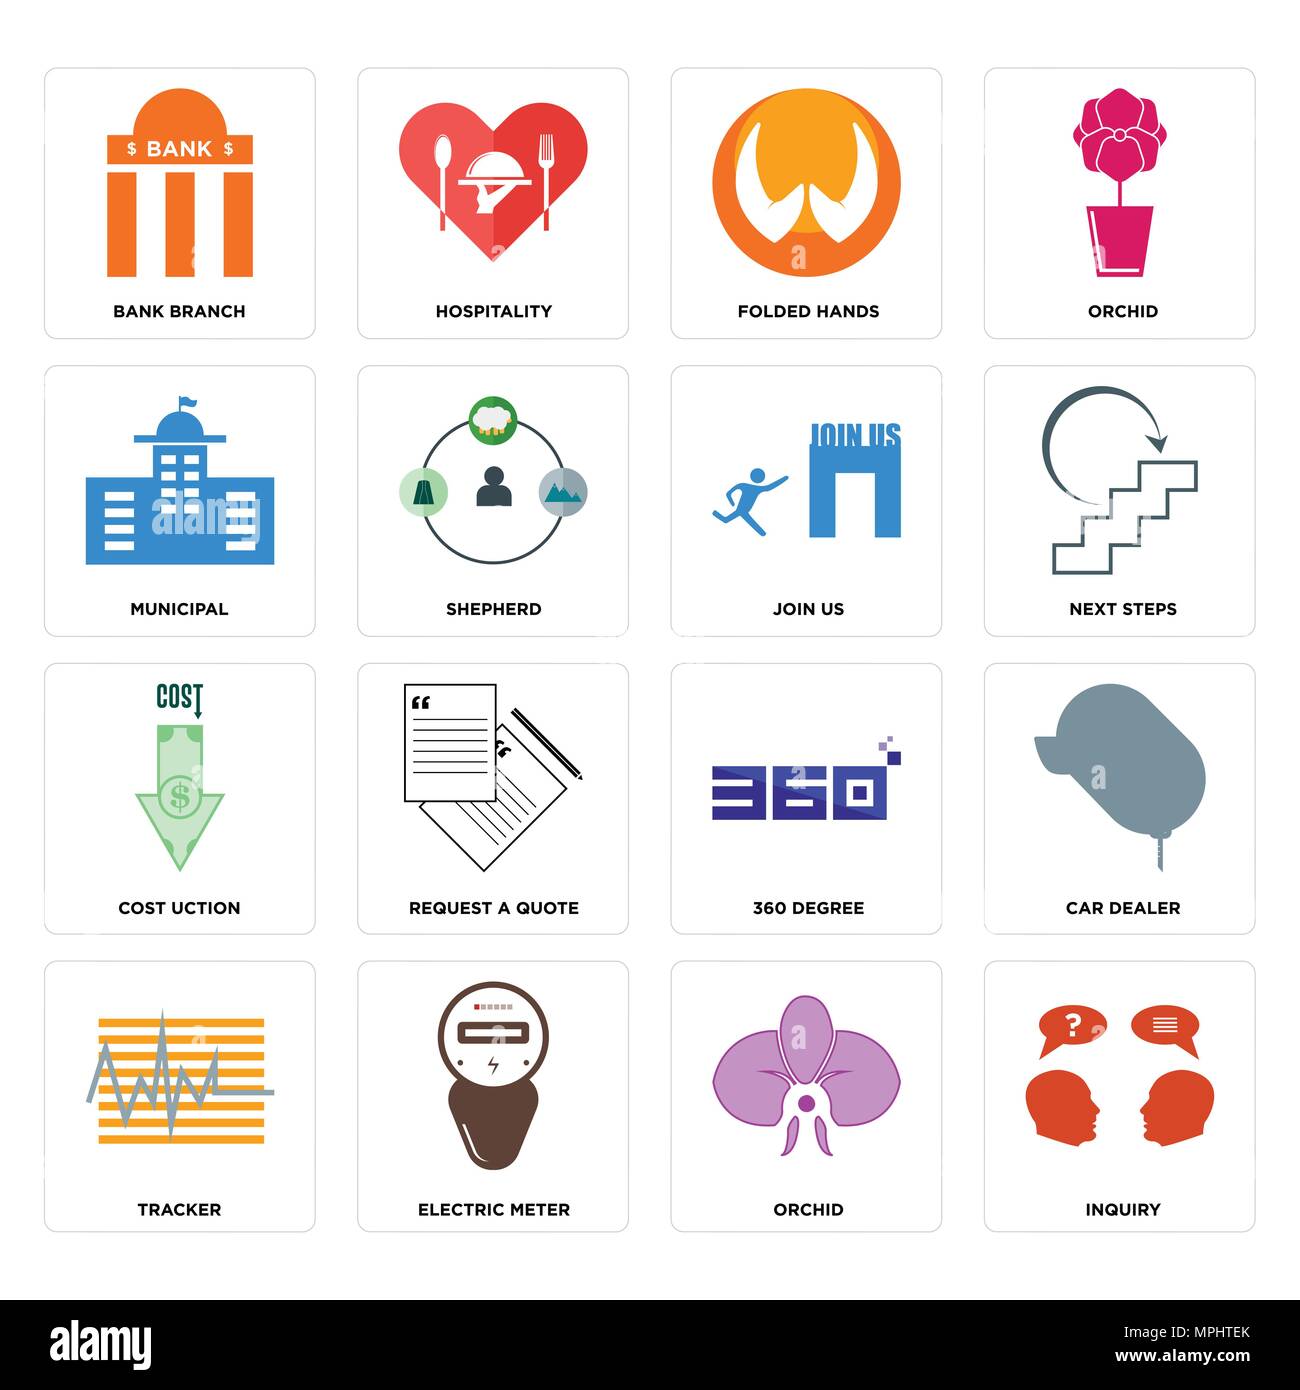 Set Of 16 simple editable icons such as inquiry, orchid, electric meter, tracker, car dealer, bank branch, municipal, cost uction, join us can be used Stock Vector